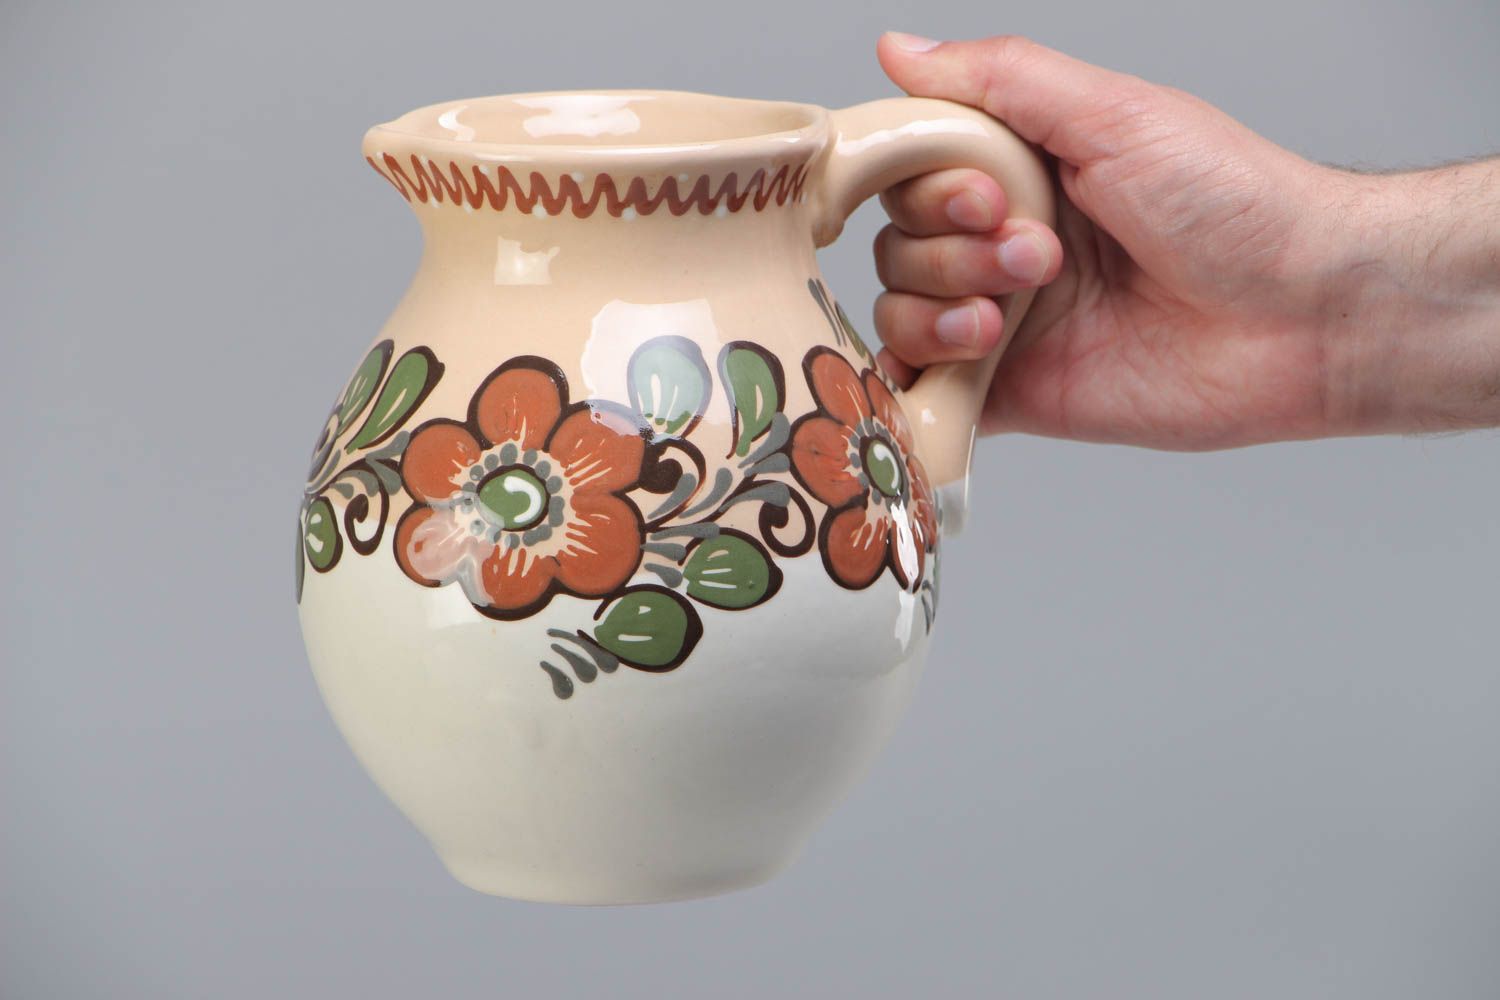 90 oz ceramic white glazed pitcher jug with hand-painted floral picture 2 lb photo 5